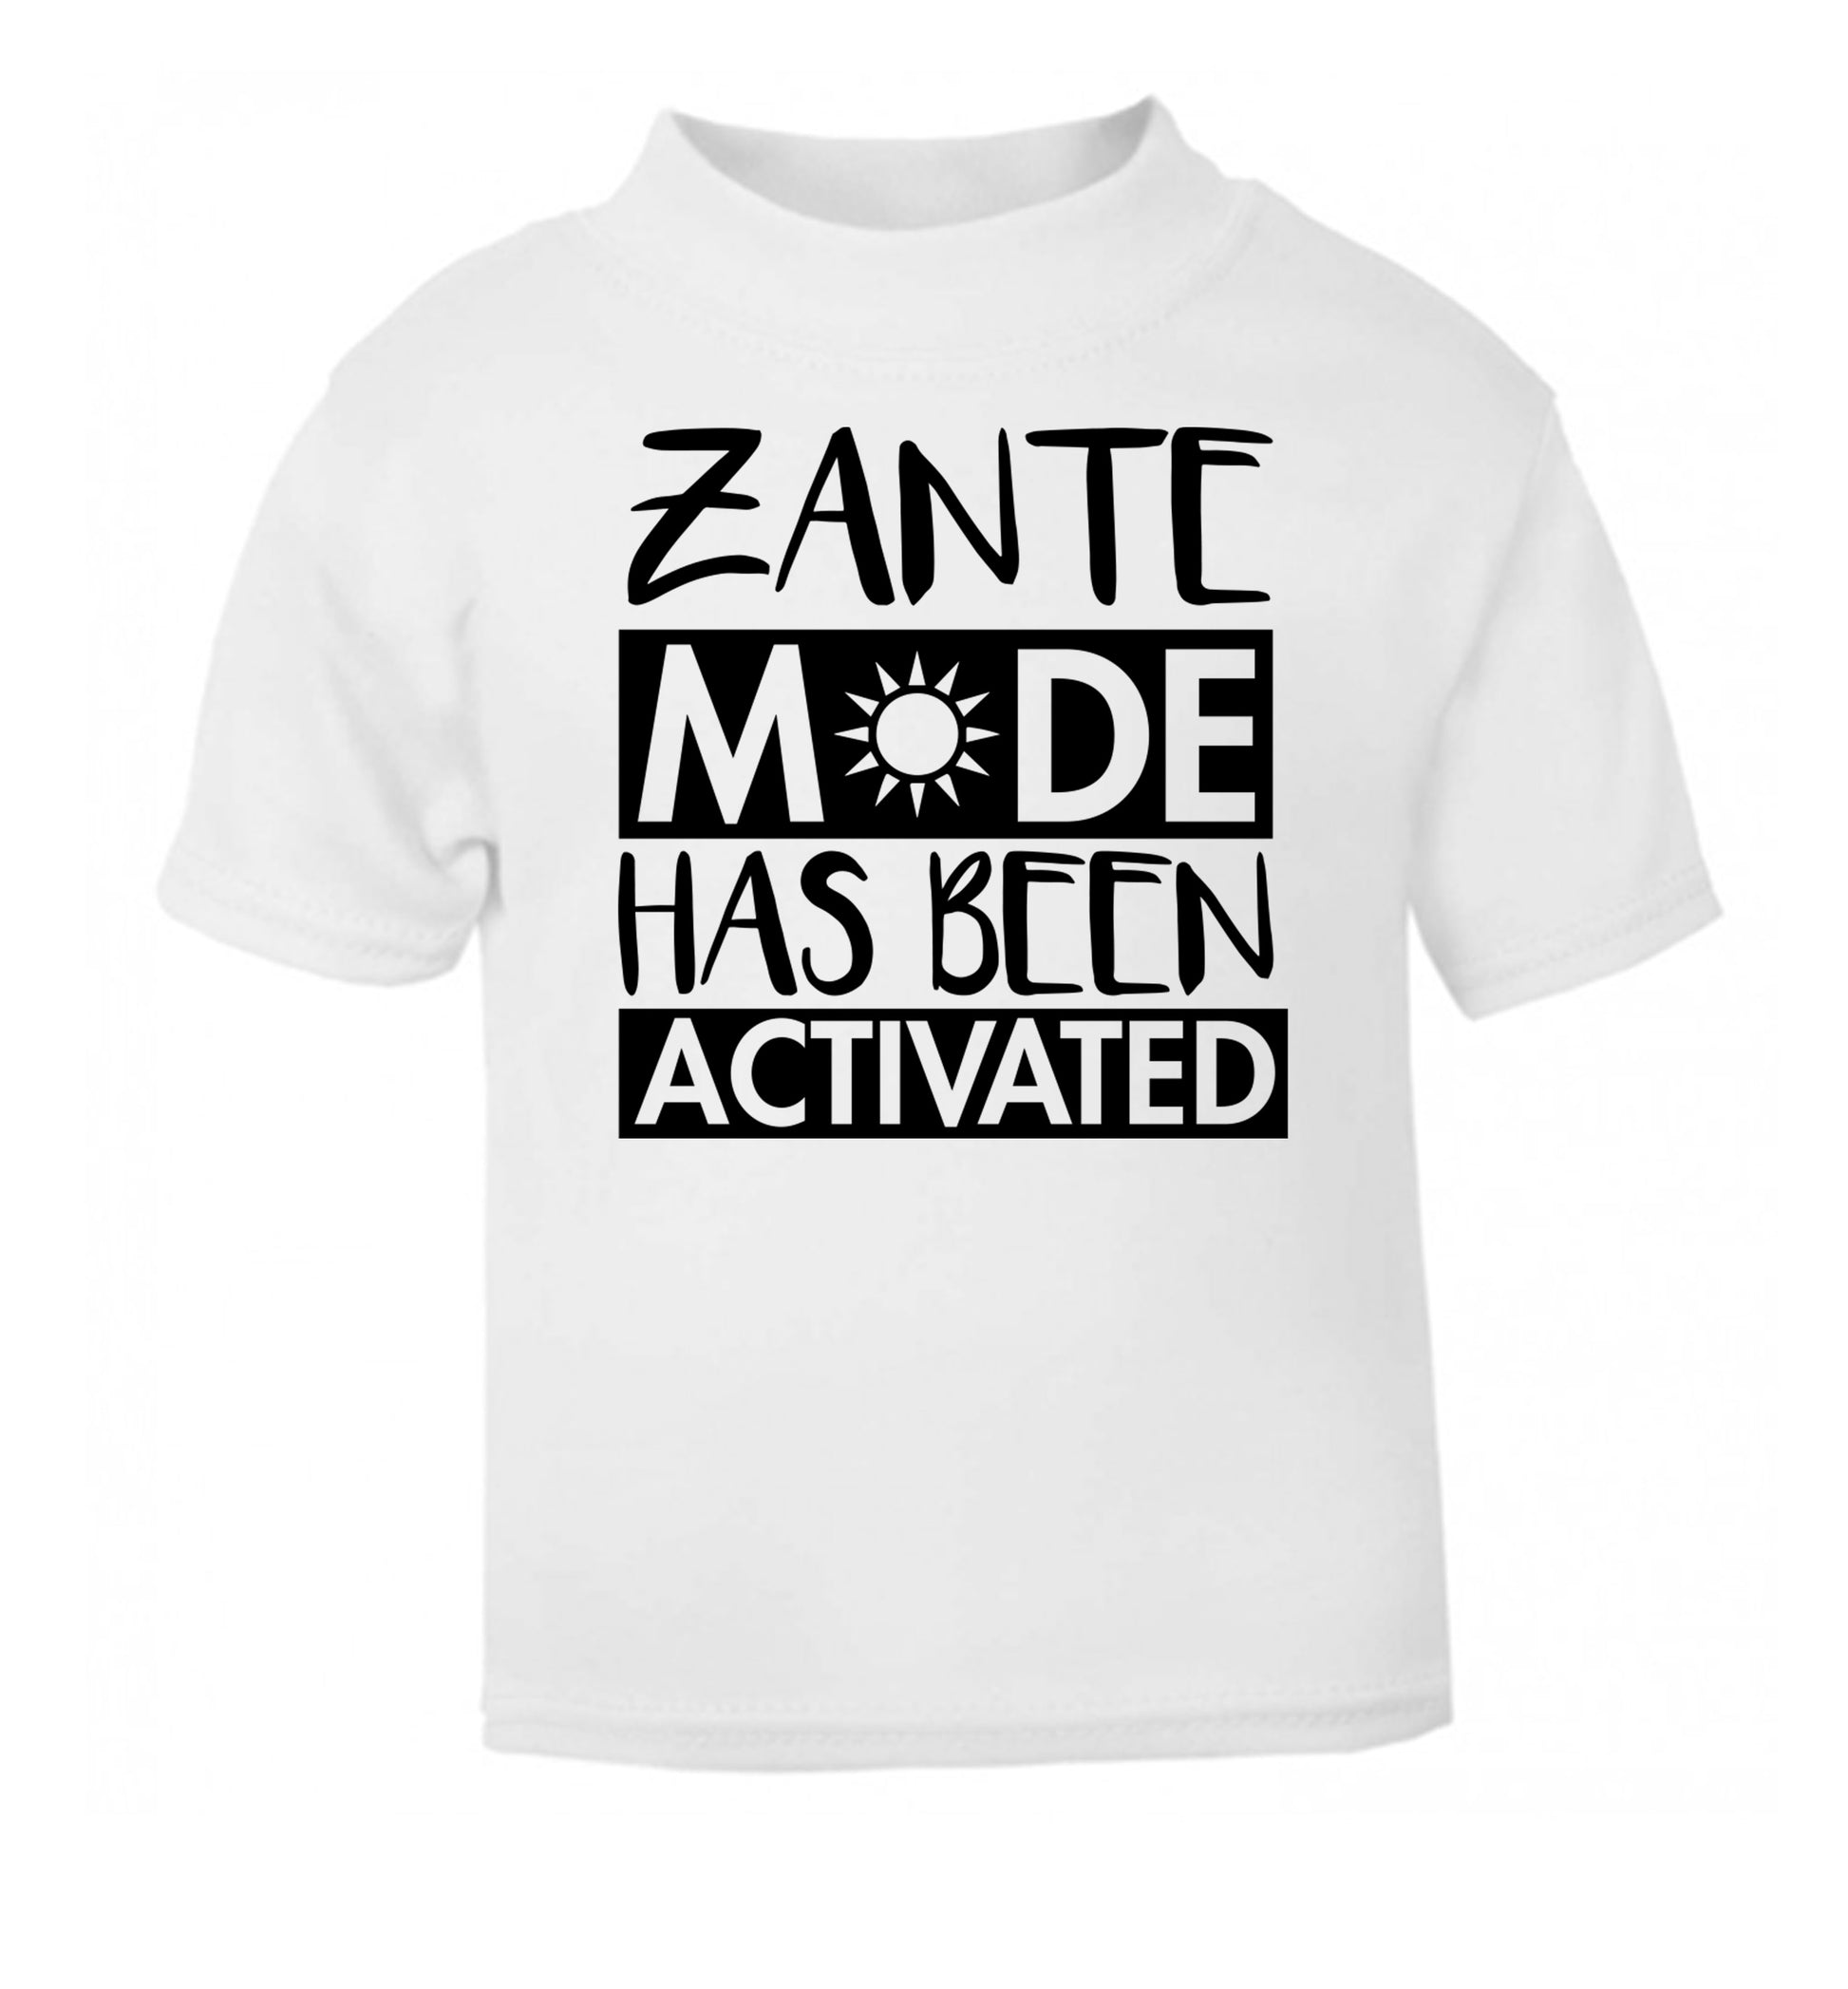 Zante mode has been activated white Baby Toddler Tshirt 2 Years